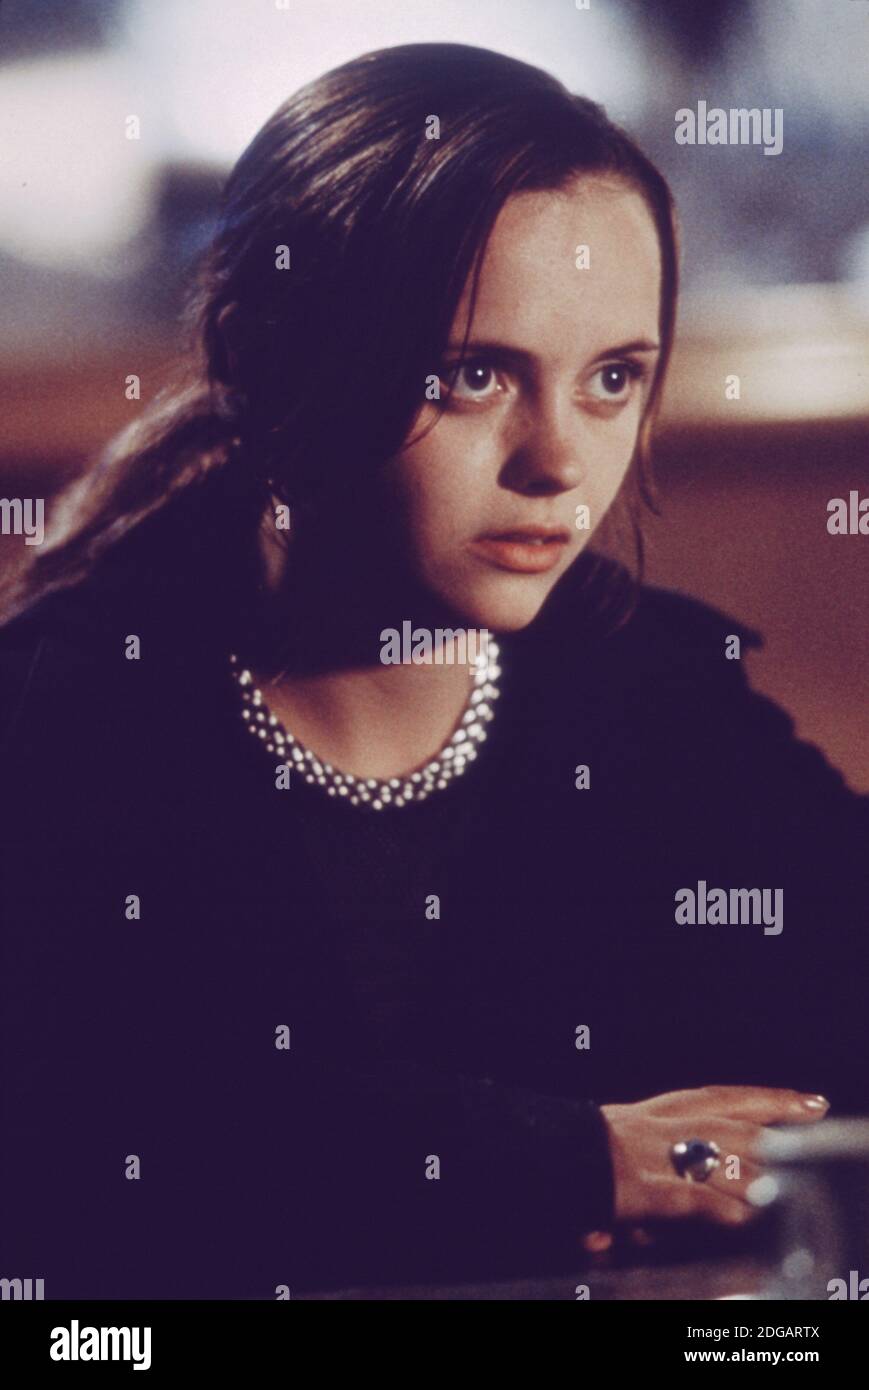 Actor Christina Ricci as Cheri stars in 'Bless The Child' Stock Photo